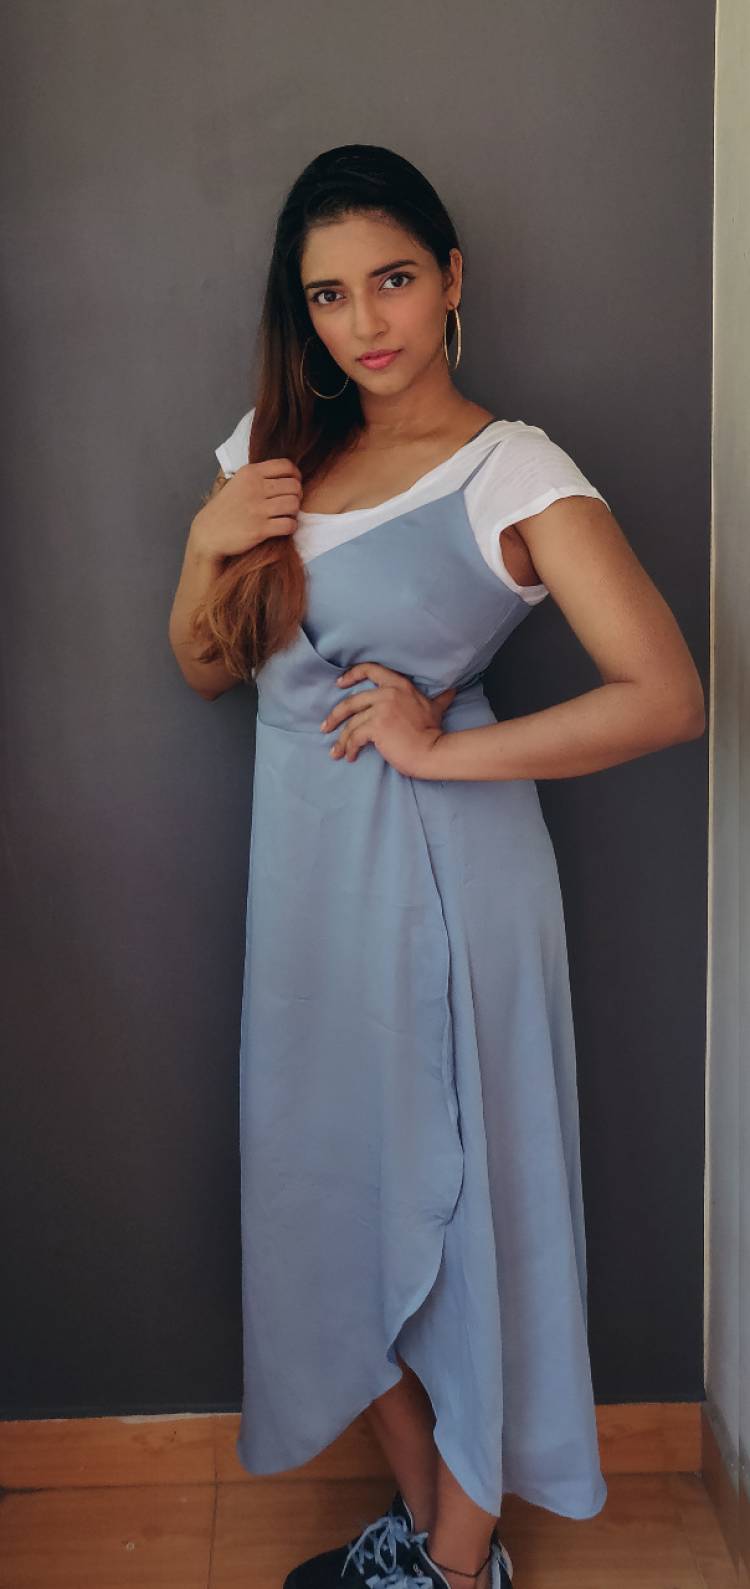 Rockin’ blue to beat the blues! Just casual clicks of Actress @ivasuuu